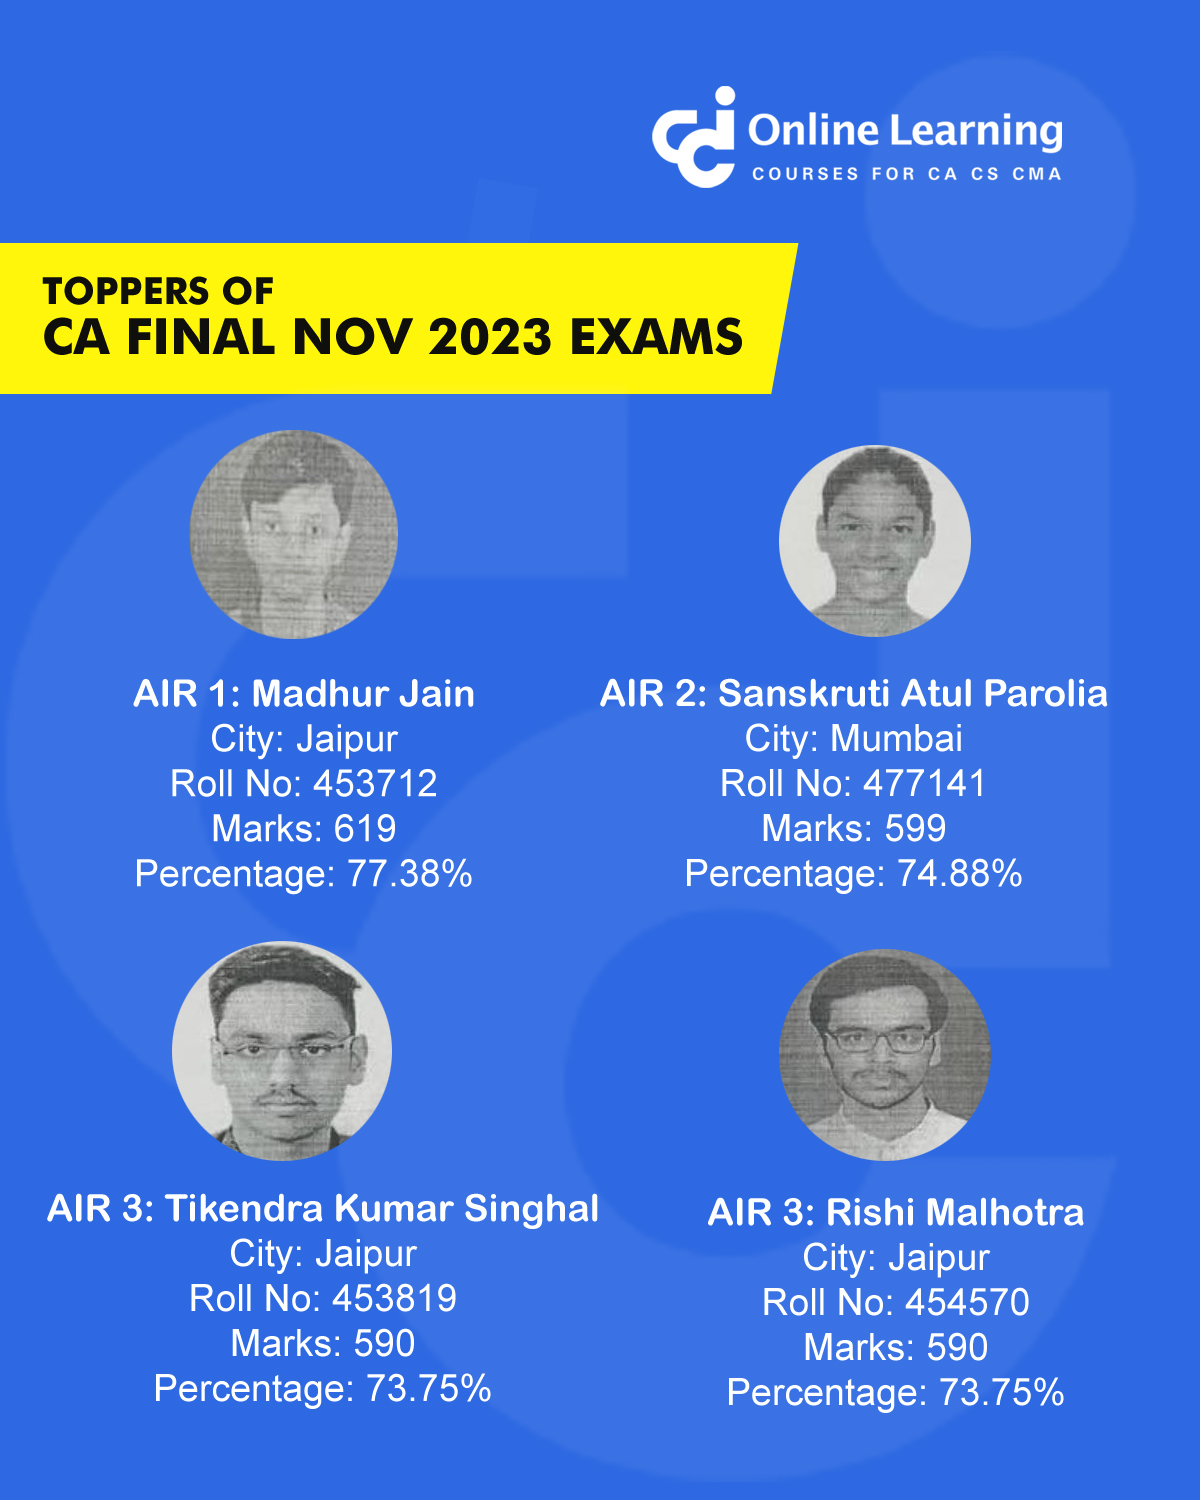 Toppers of CA Final Examination held in Nov 2023